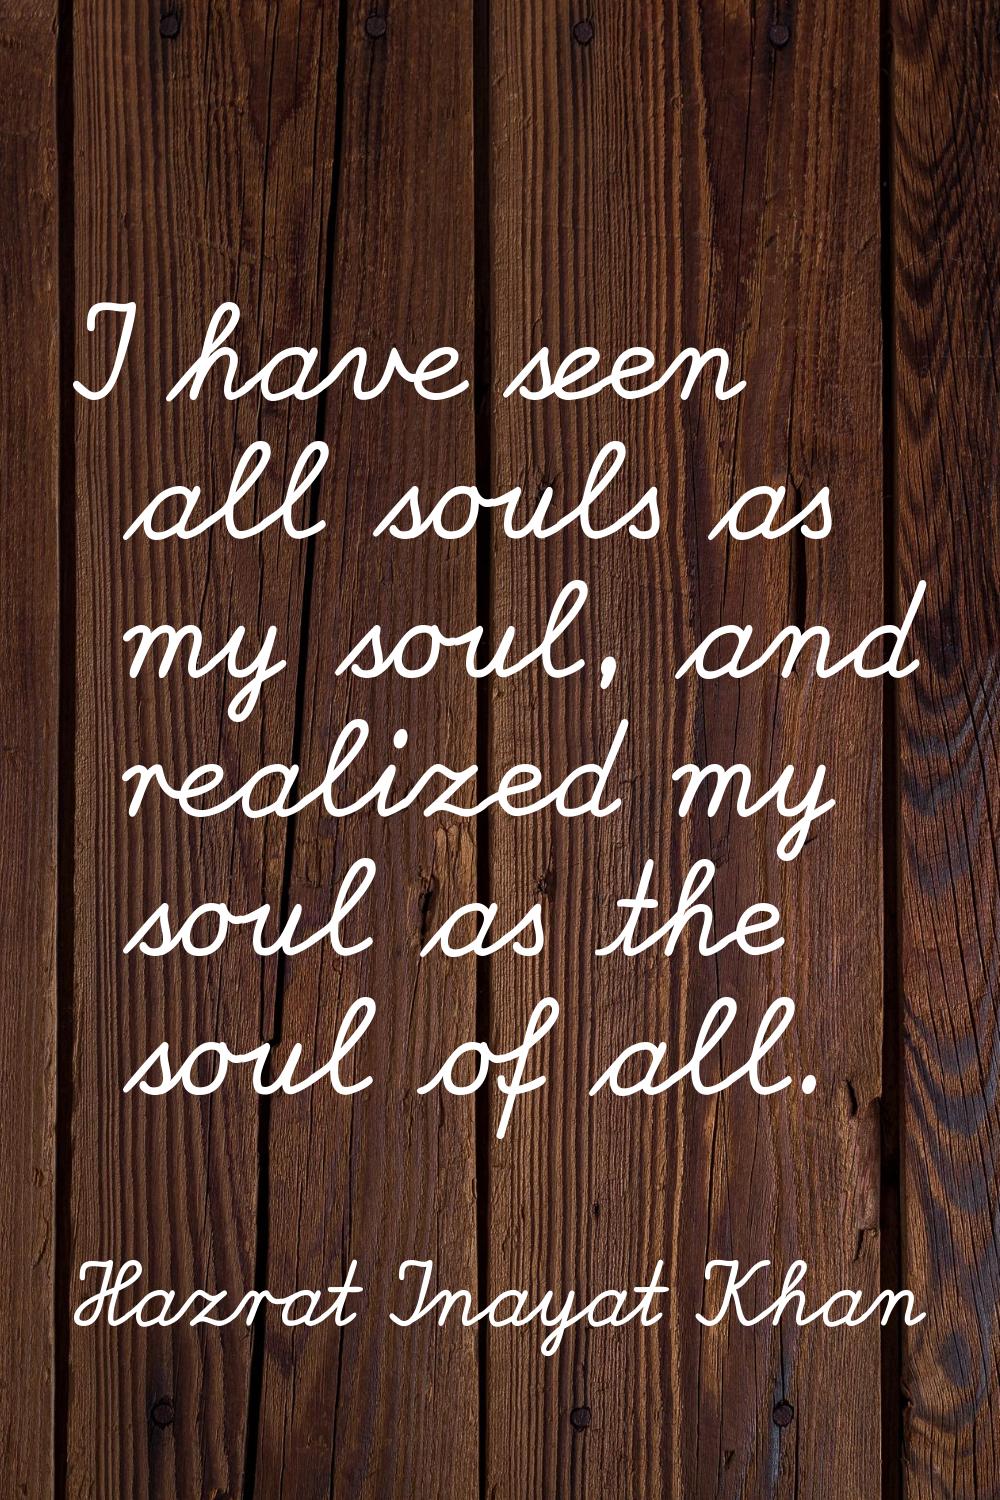 I have seen all souls as my soul, and realized my soul as the soul of all.